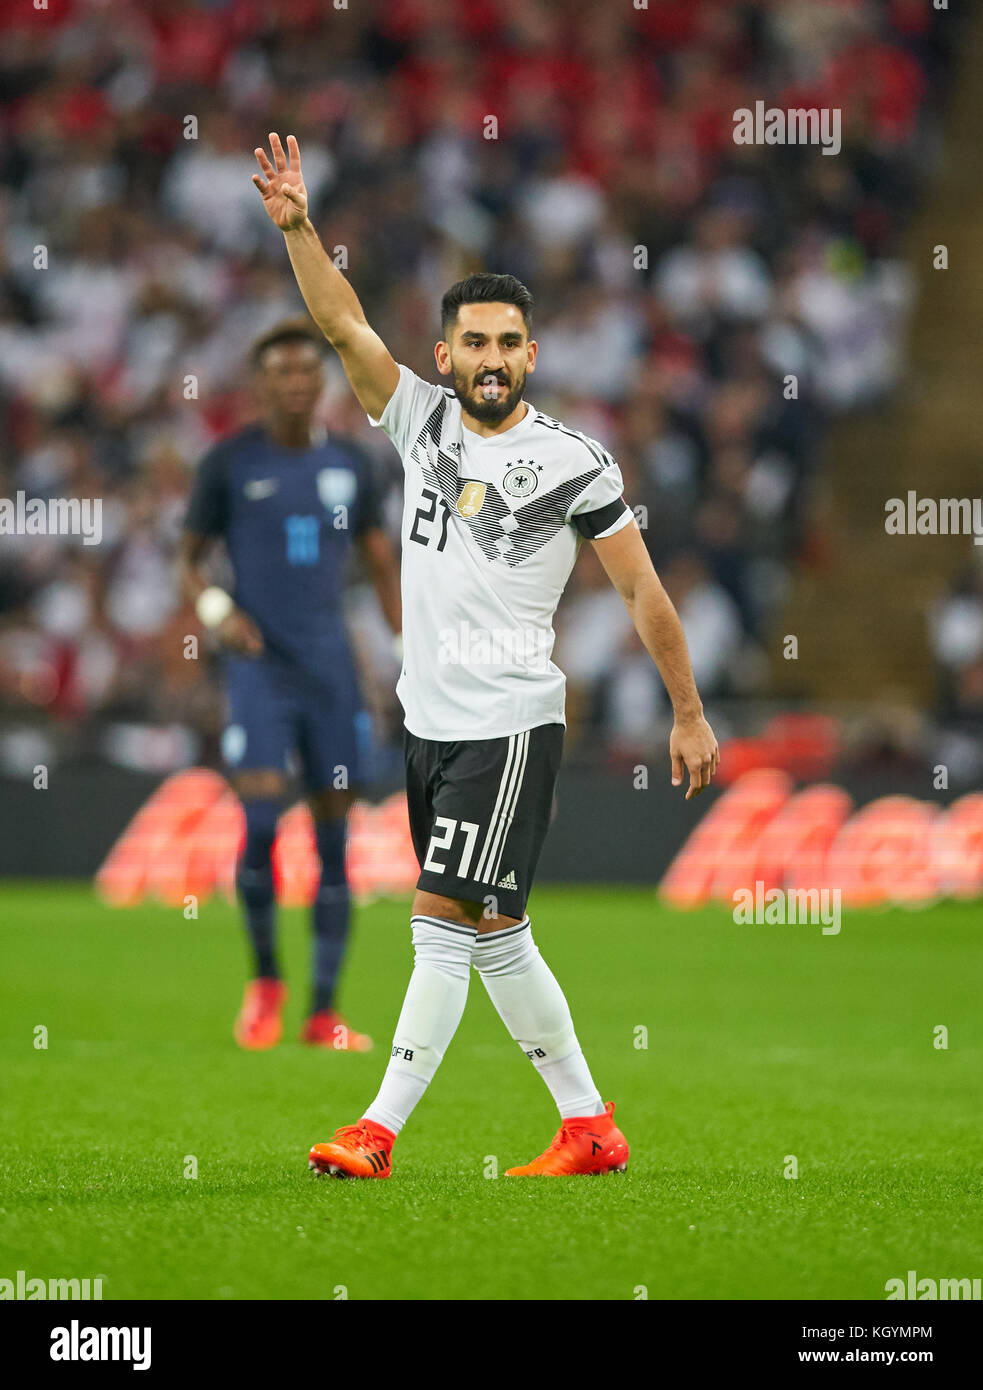 Soccer friendly match, London, November 10, 2017 Ilkay GUENDOGAN, DFB 21 Gesticulates and giving instructions, action, single image, gesture, gesture, hand movement, pointing, interpret, mimik,  ENGLAND - GERMANY  0-0 World Cup 2018 preparation match in Wembley London, United Kingdom, November 10, 2017,  Season 2017/2018 © Peter Schatz / Alamy Live News Stock Photo